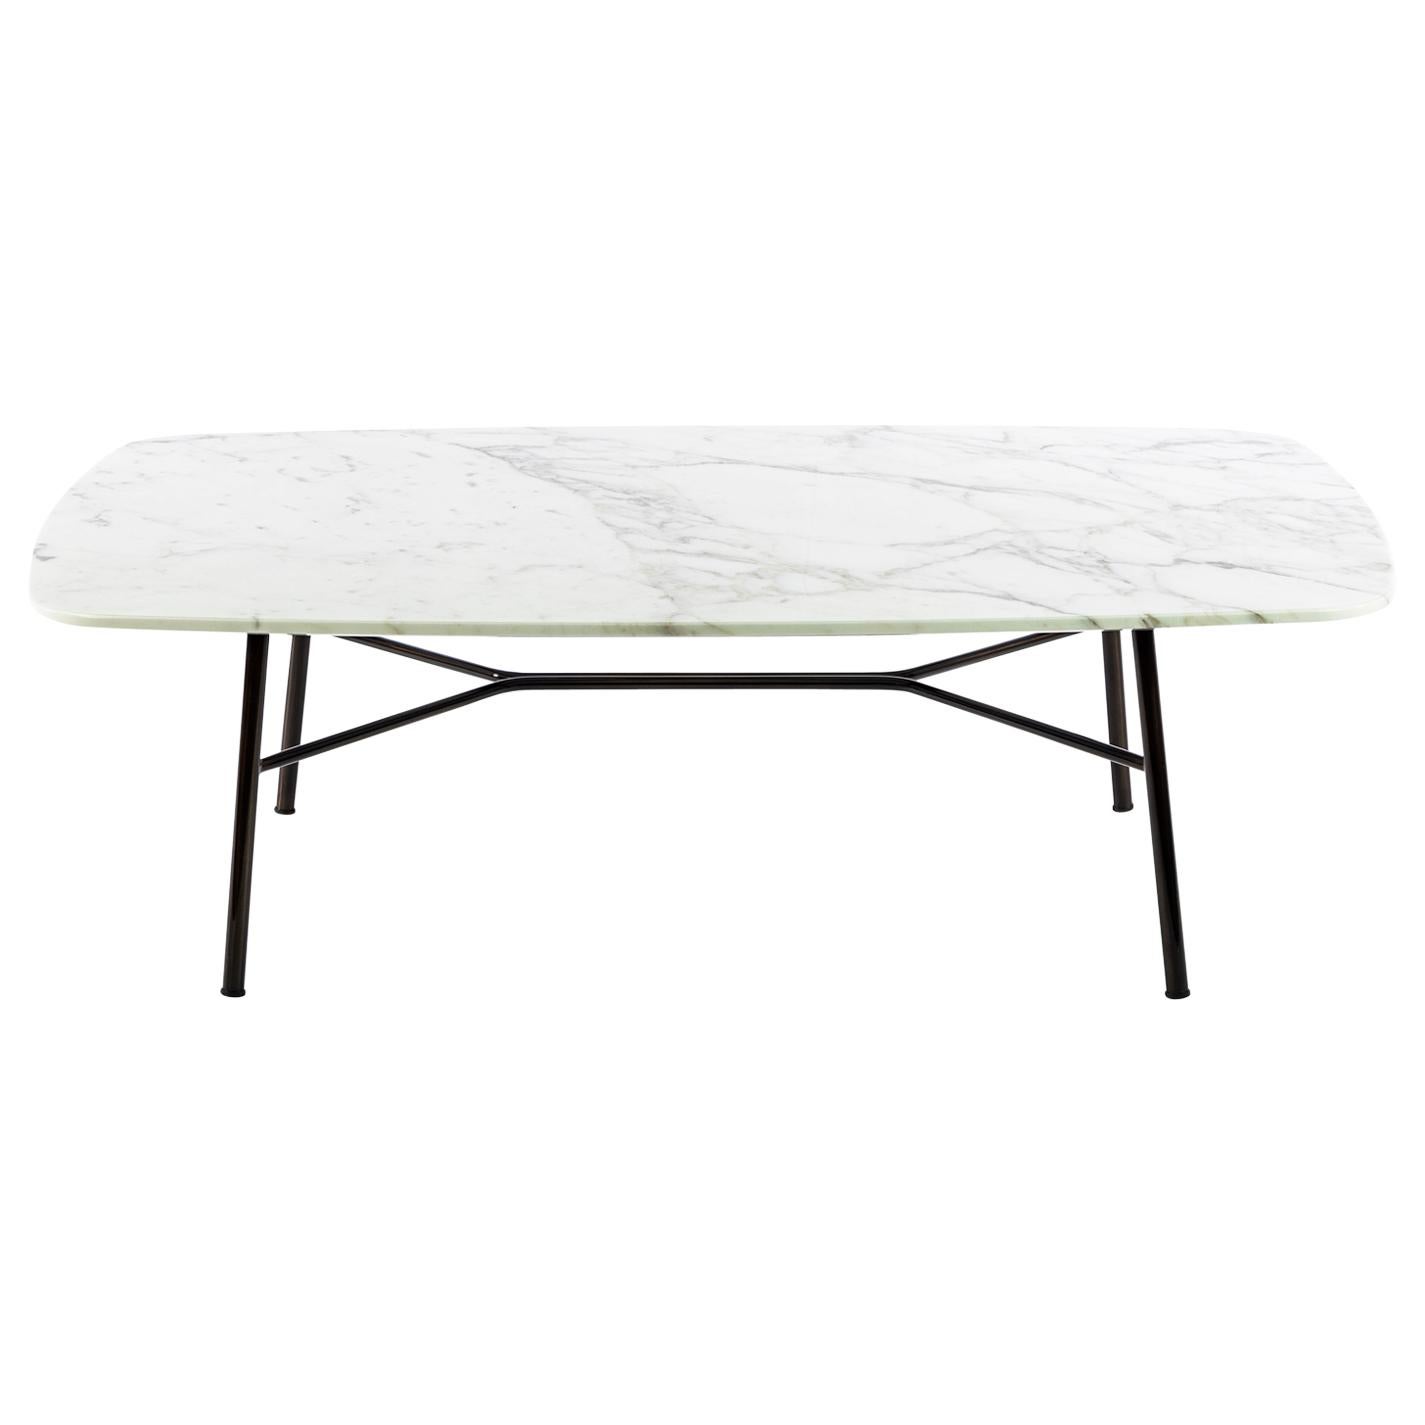 Little Table Yuki, Metal Frame, White Color, Design, Coffee Table, Glass, Marble For Sale